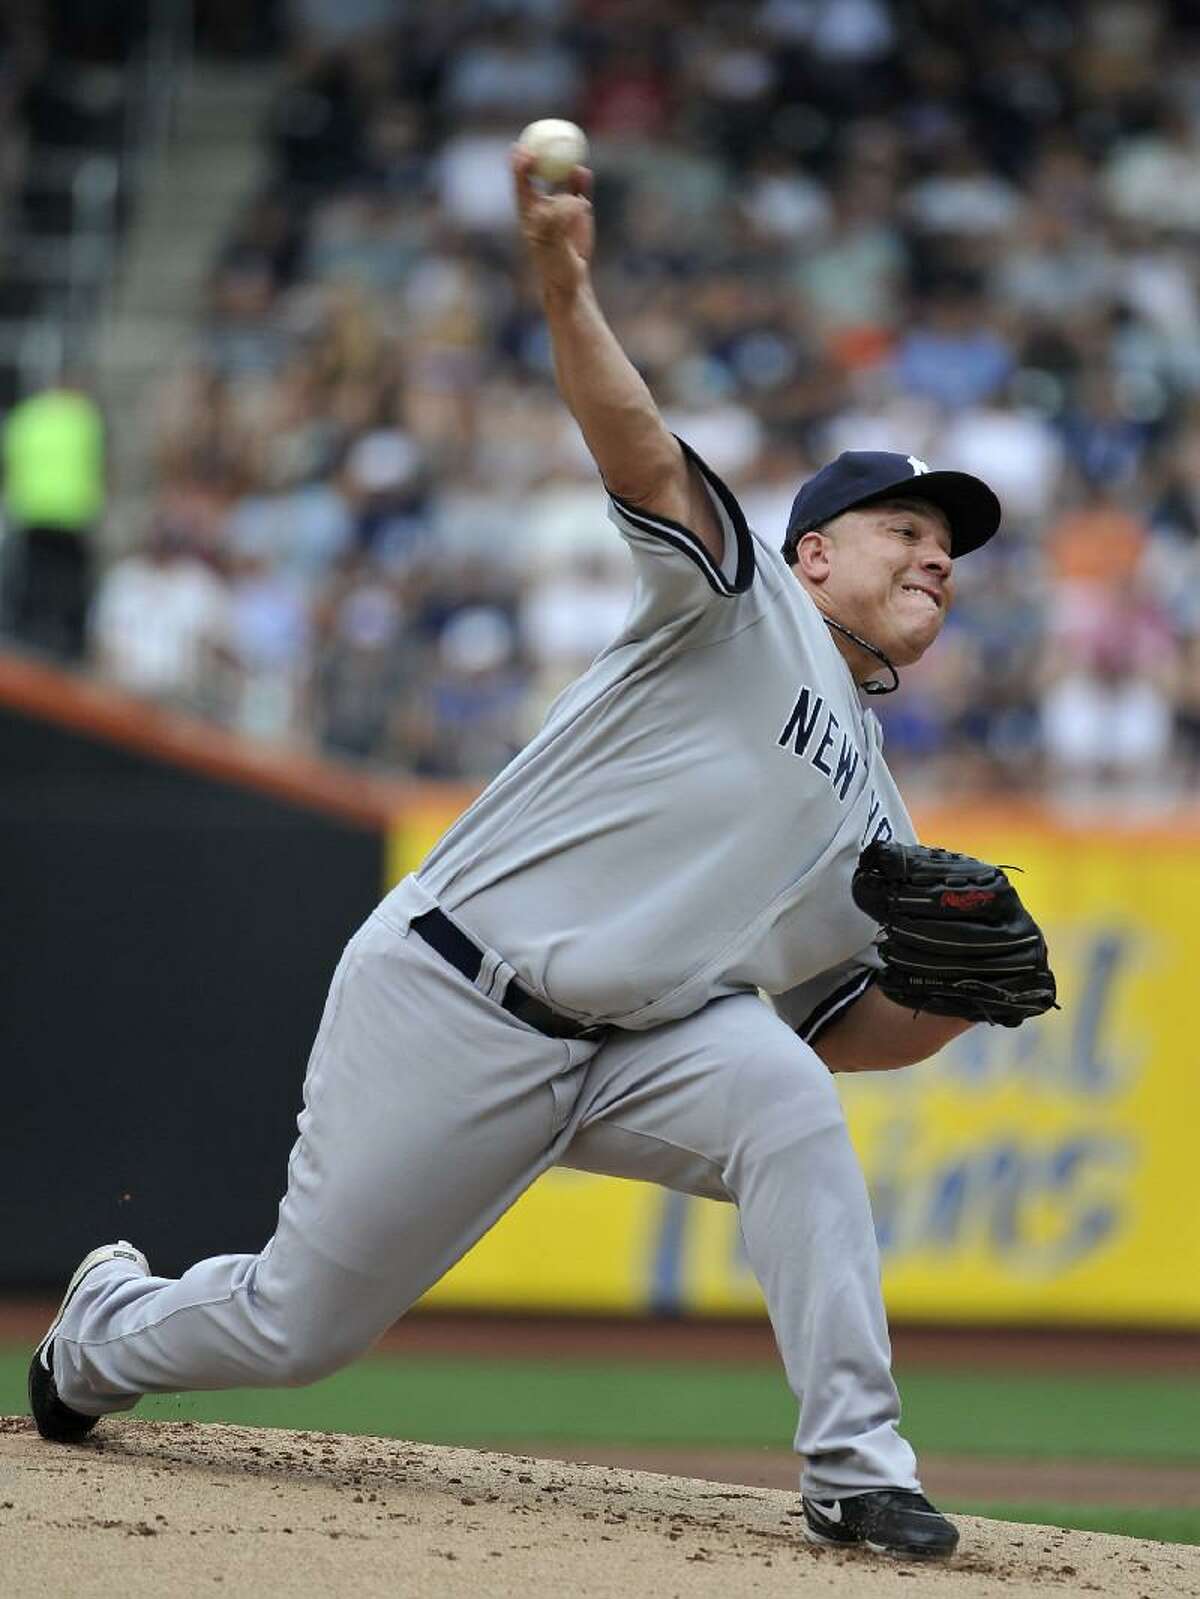 Bartolo Colon likely will return to pitch for Yankees against Mets